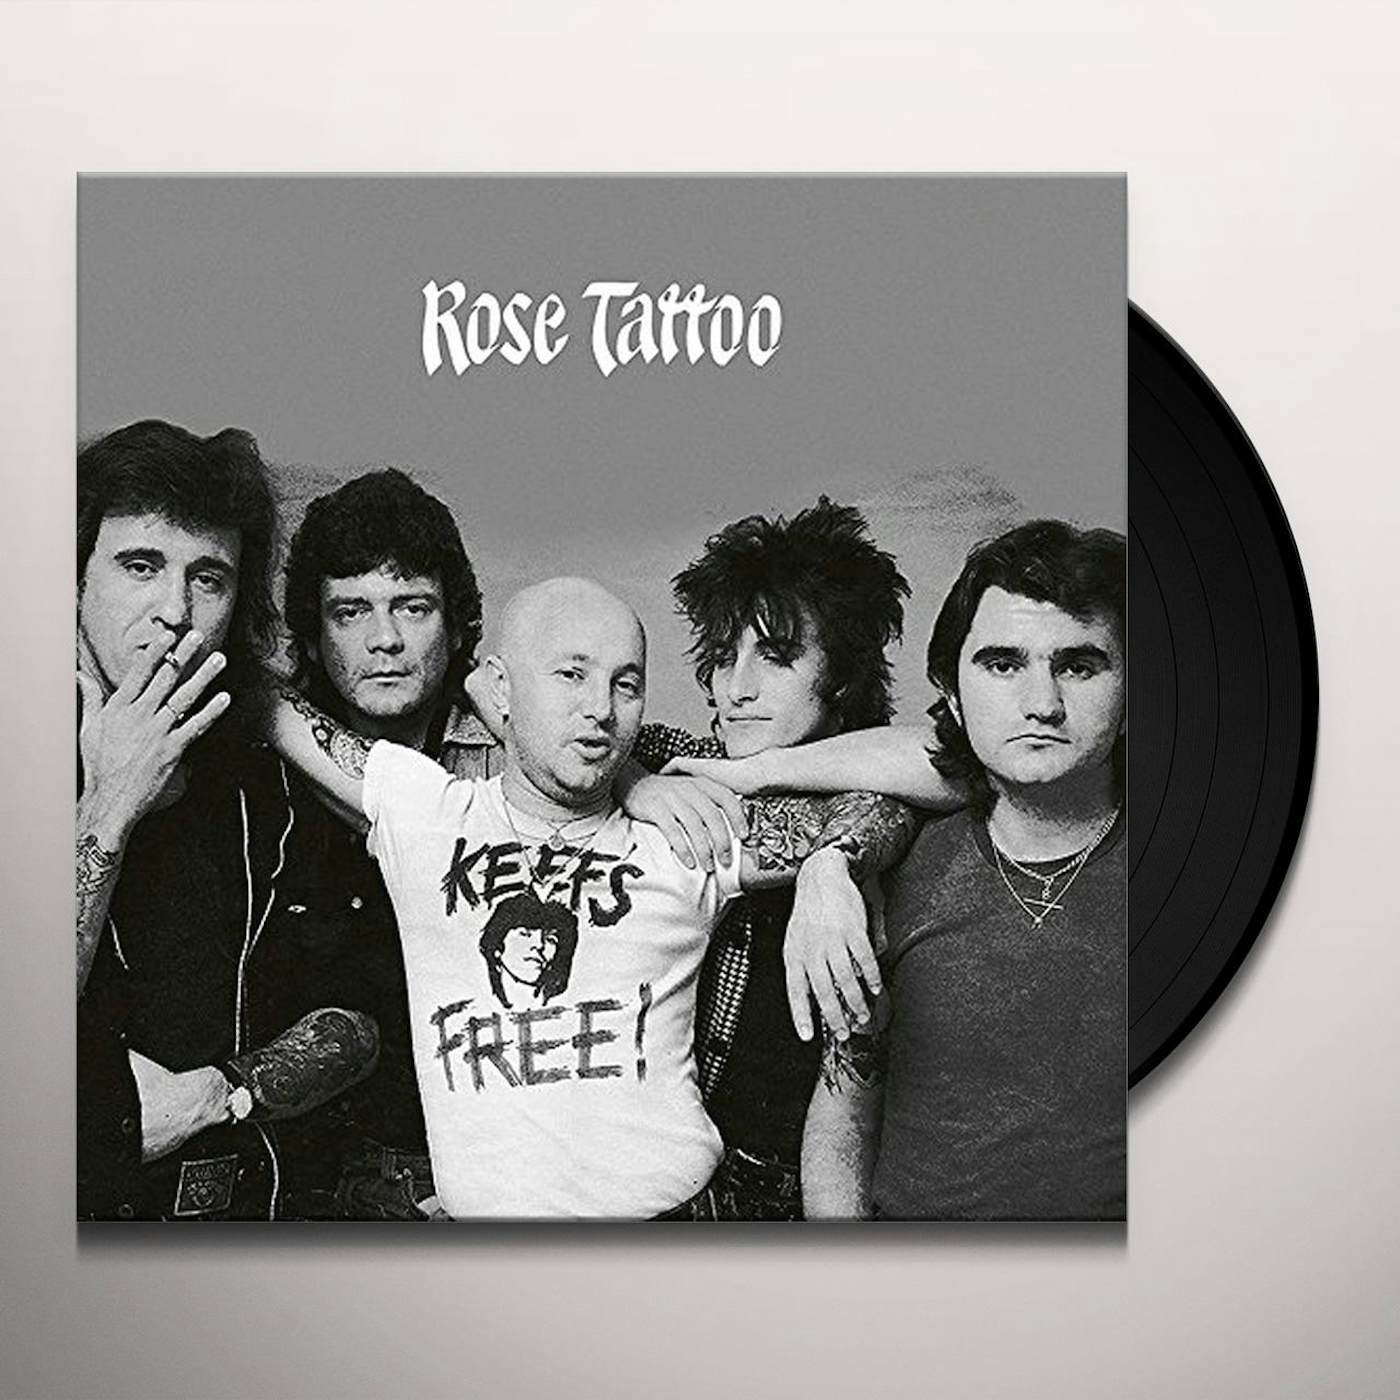 Rose Tattoo KEEF'S FREE: BEST OF 1978-1982 Vinyl Record